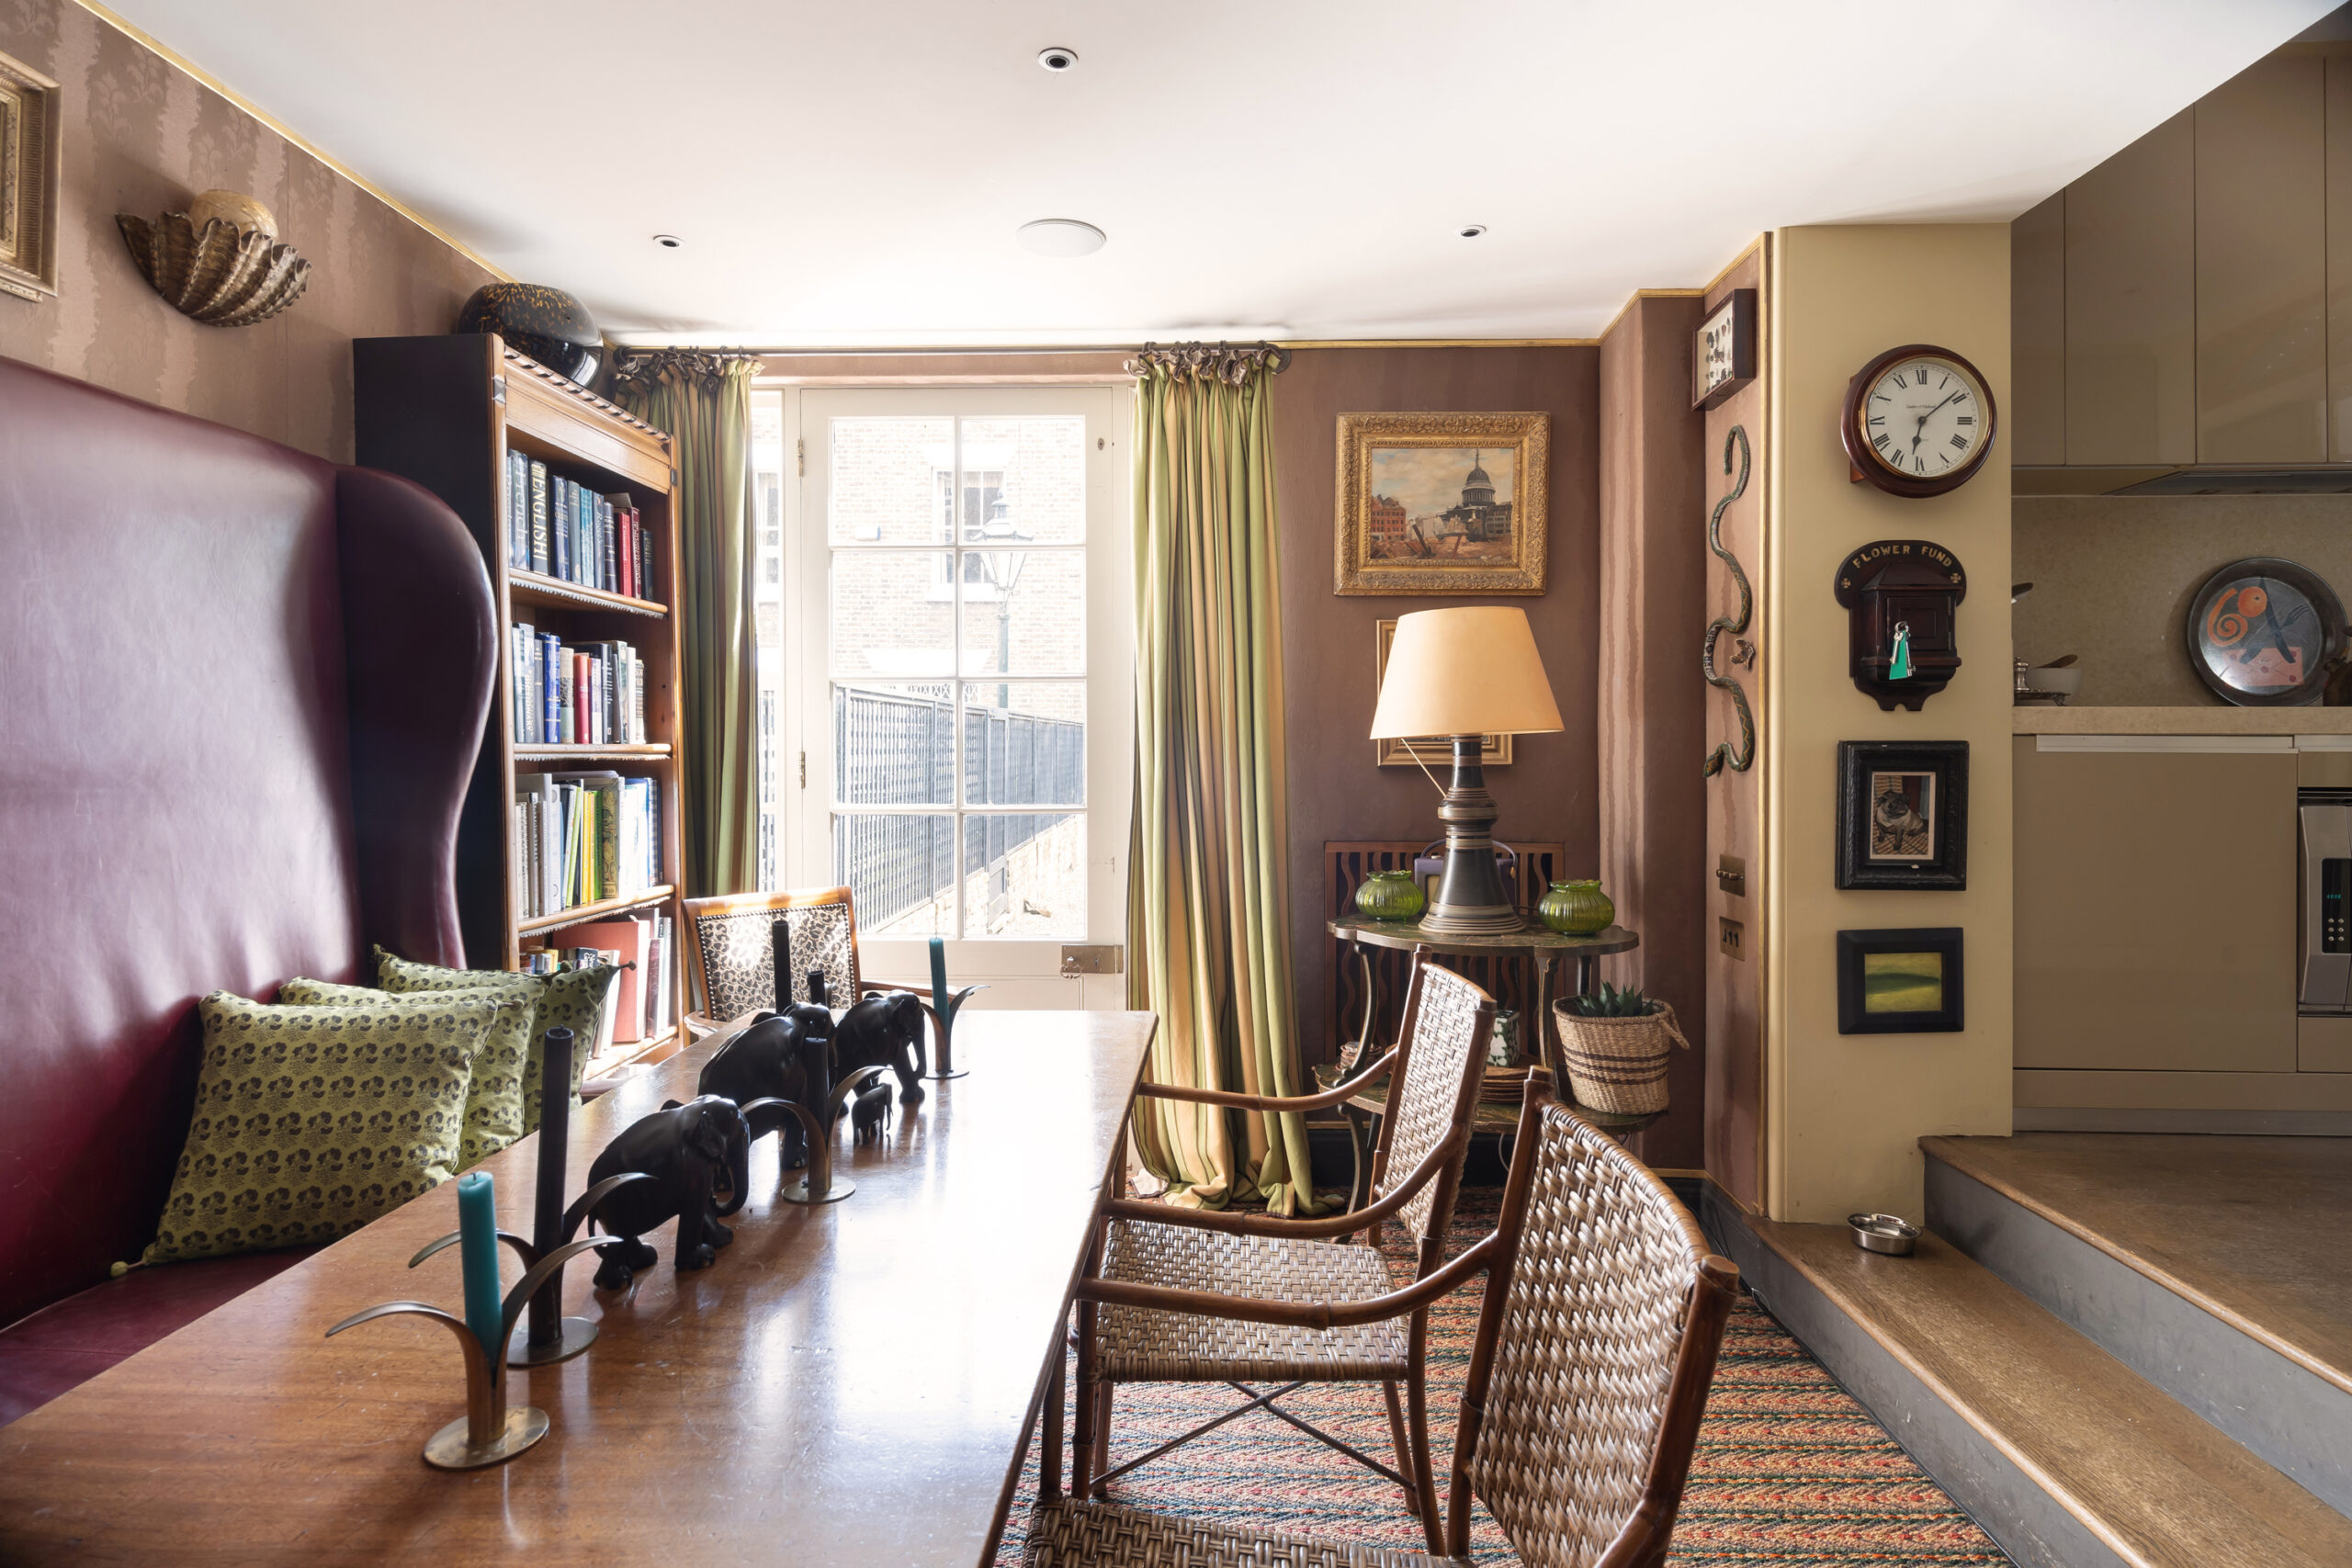 For Sale: Gordon Place, Kensington W8 sophisticated dining room